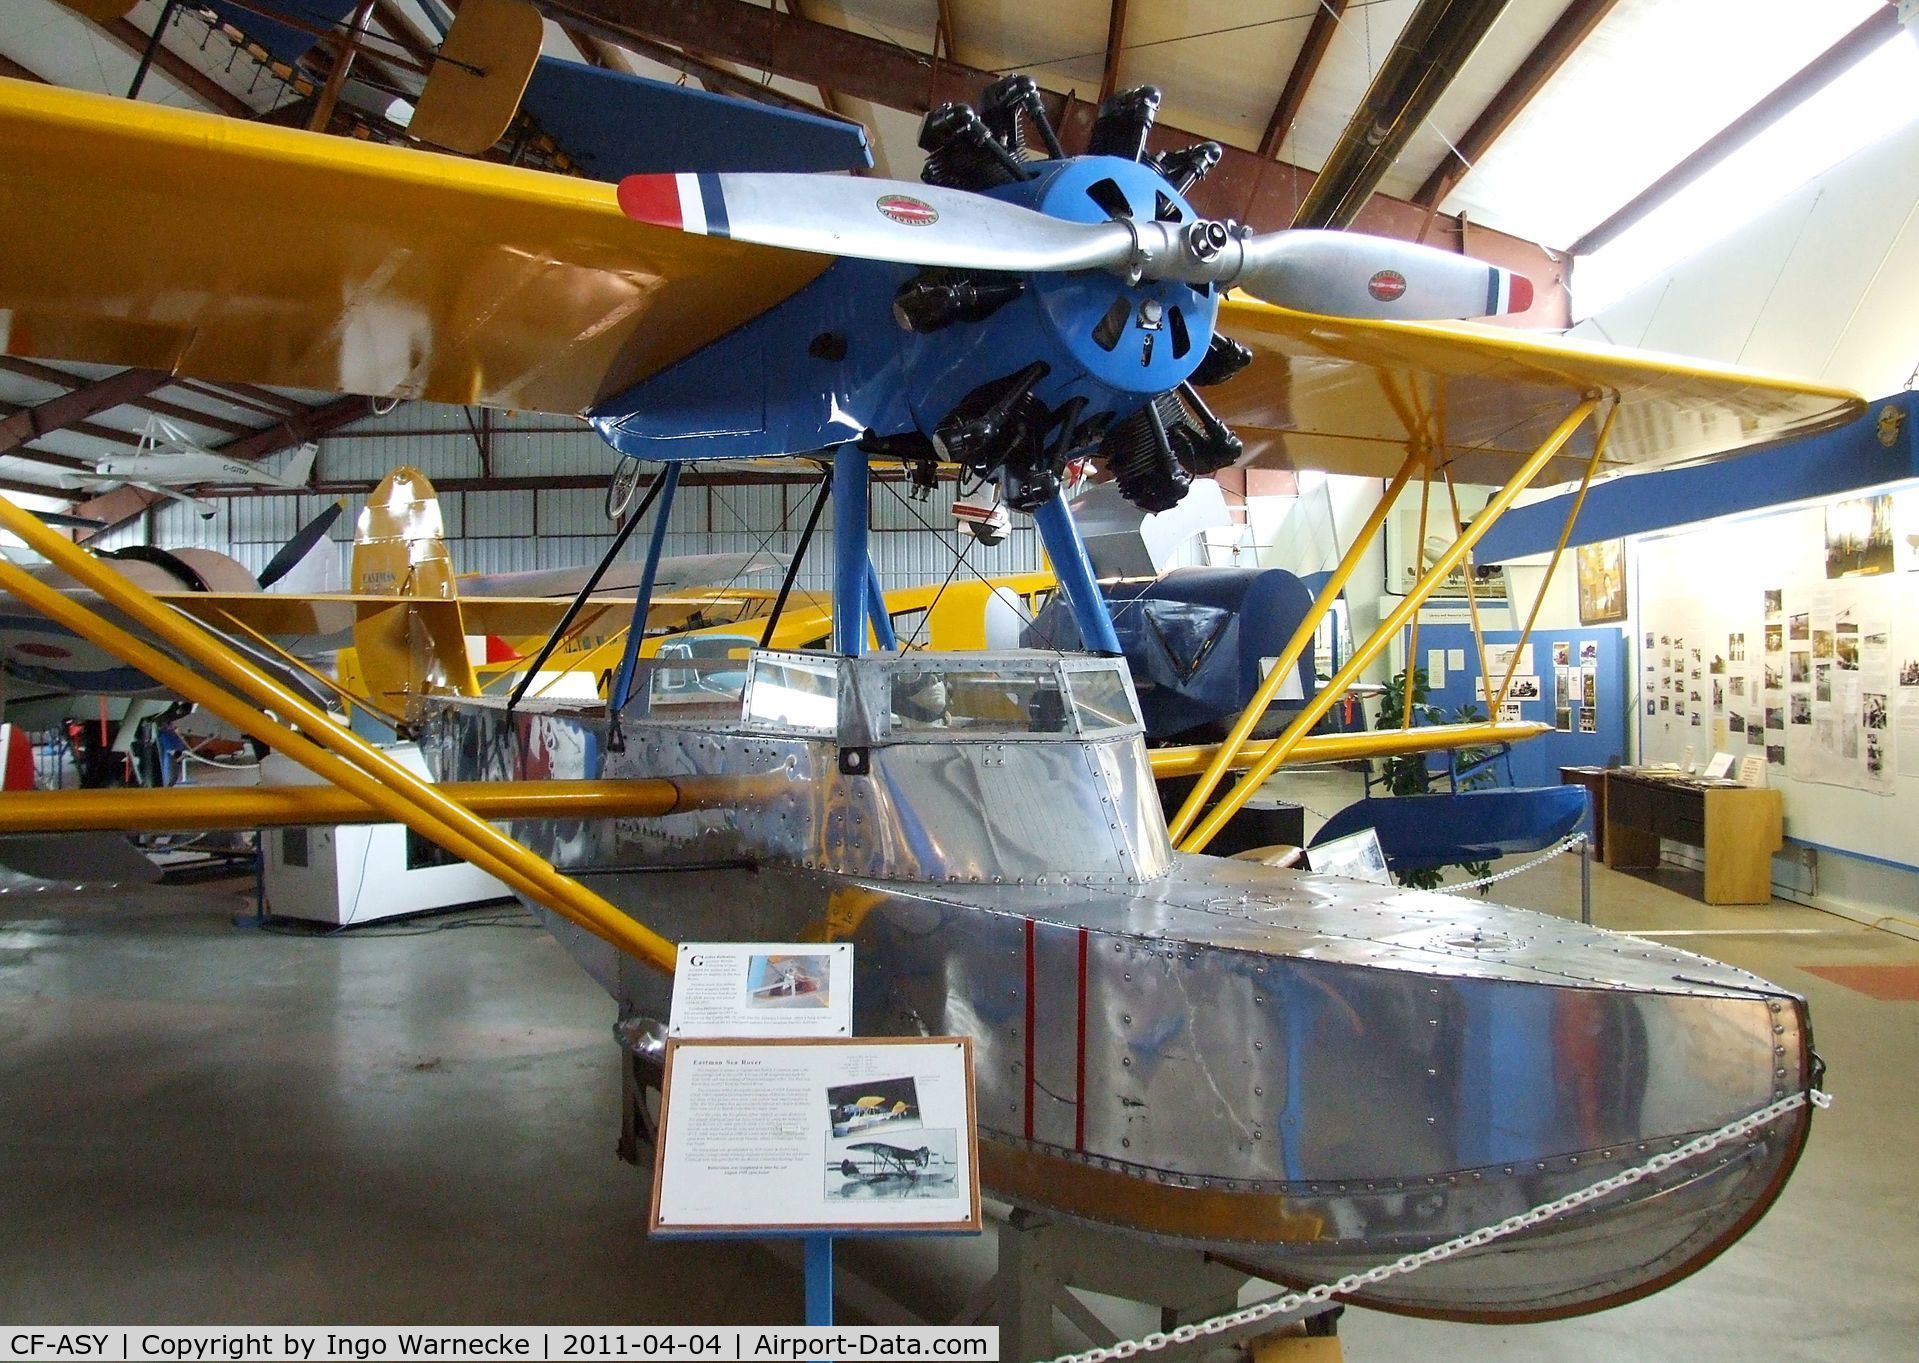 CF-ASY, Eastman E-2 Sea Rover C/N 17, Eastman E-2 Sea Rover (with parts of CF-ASW, c/n: 16) at the British Columbia Aviation Museum, Sidney BC